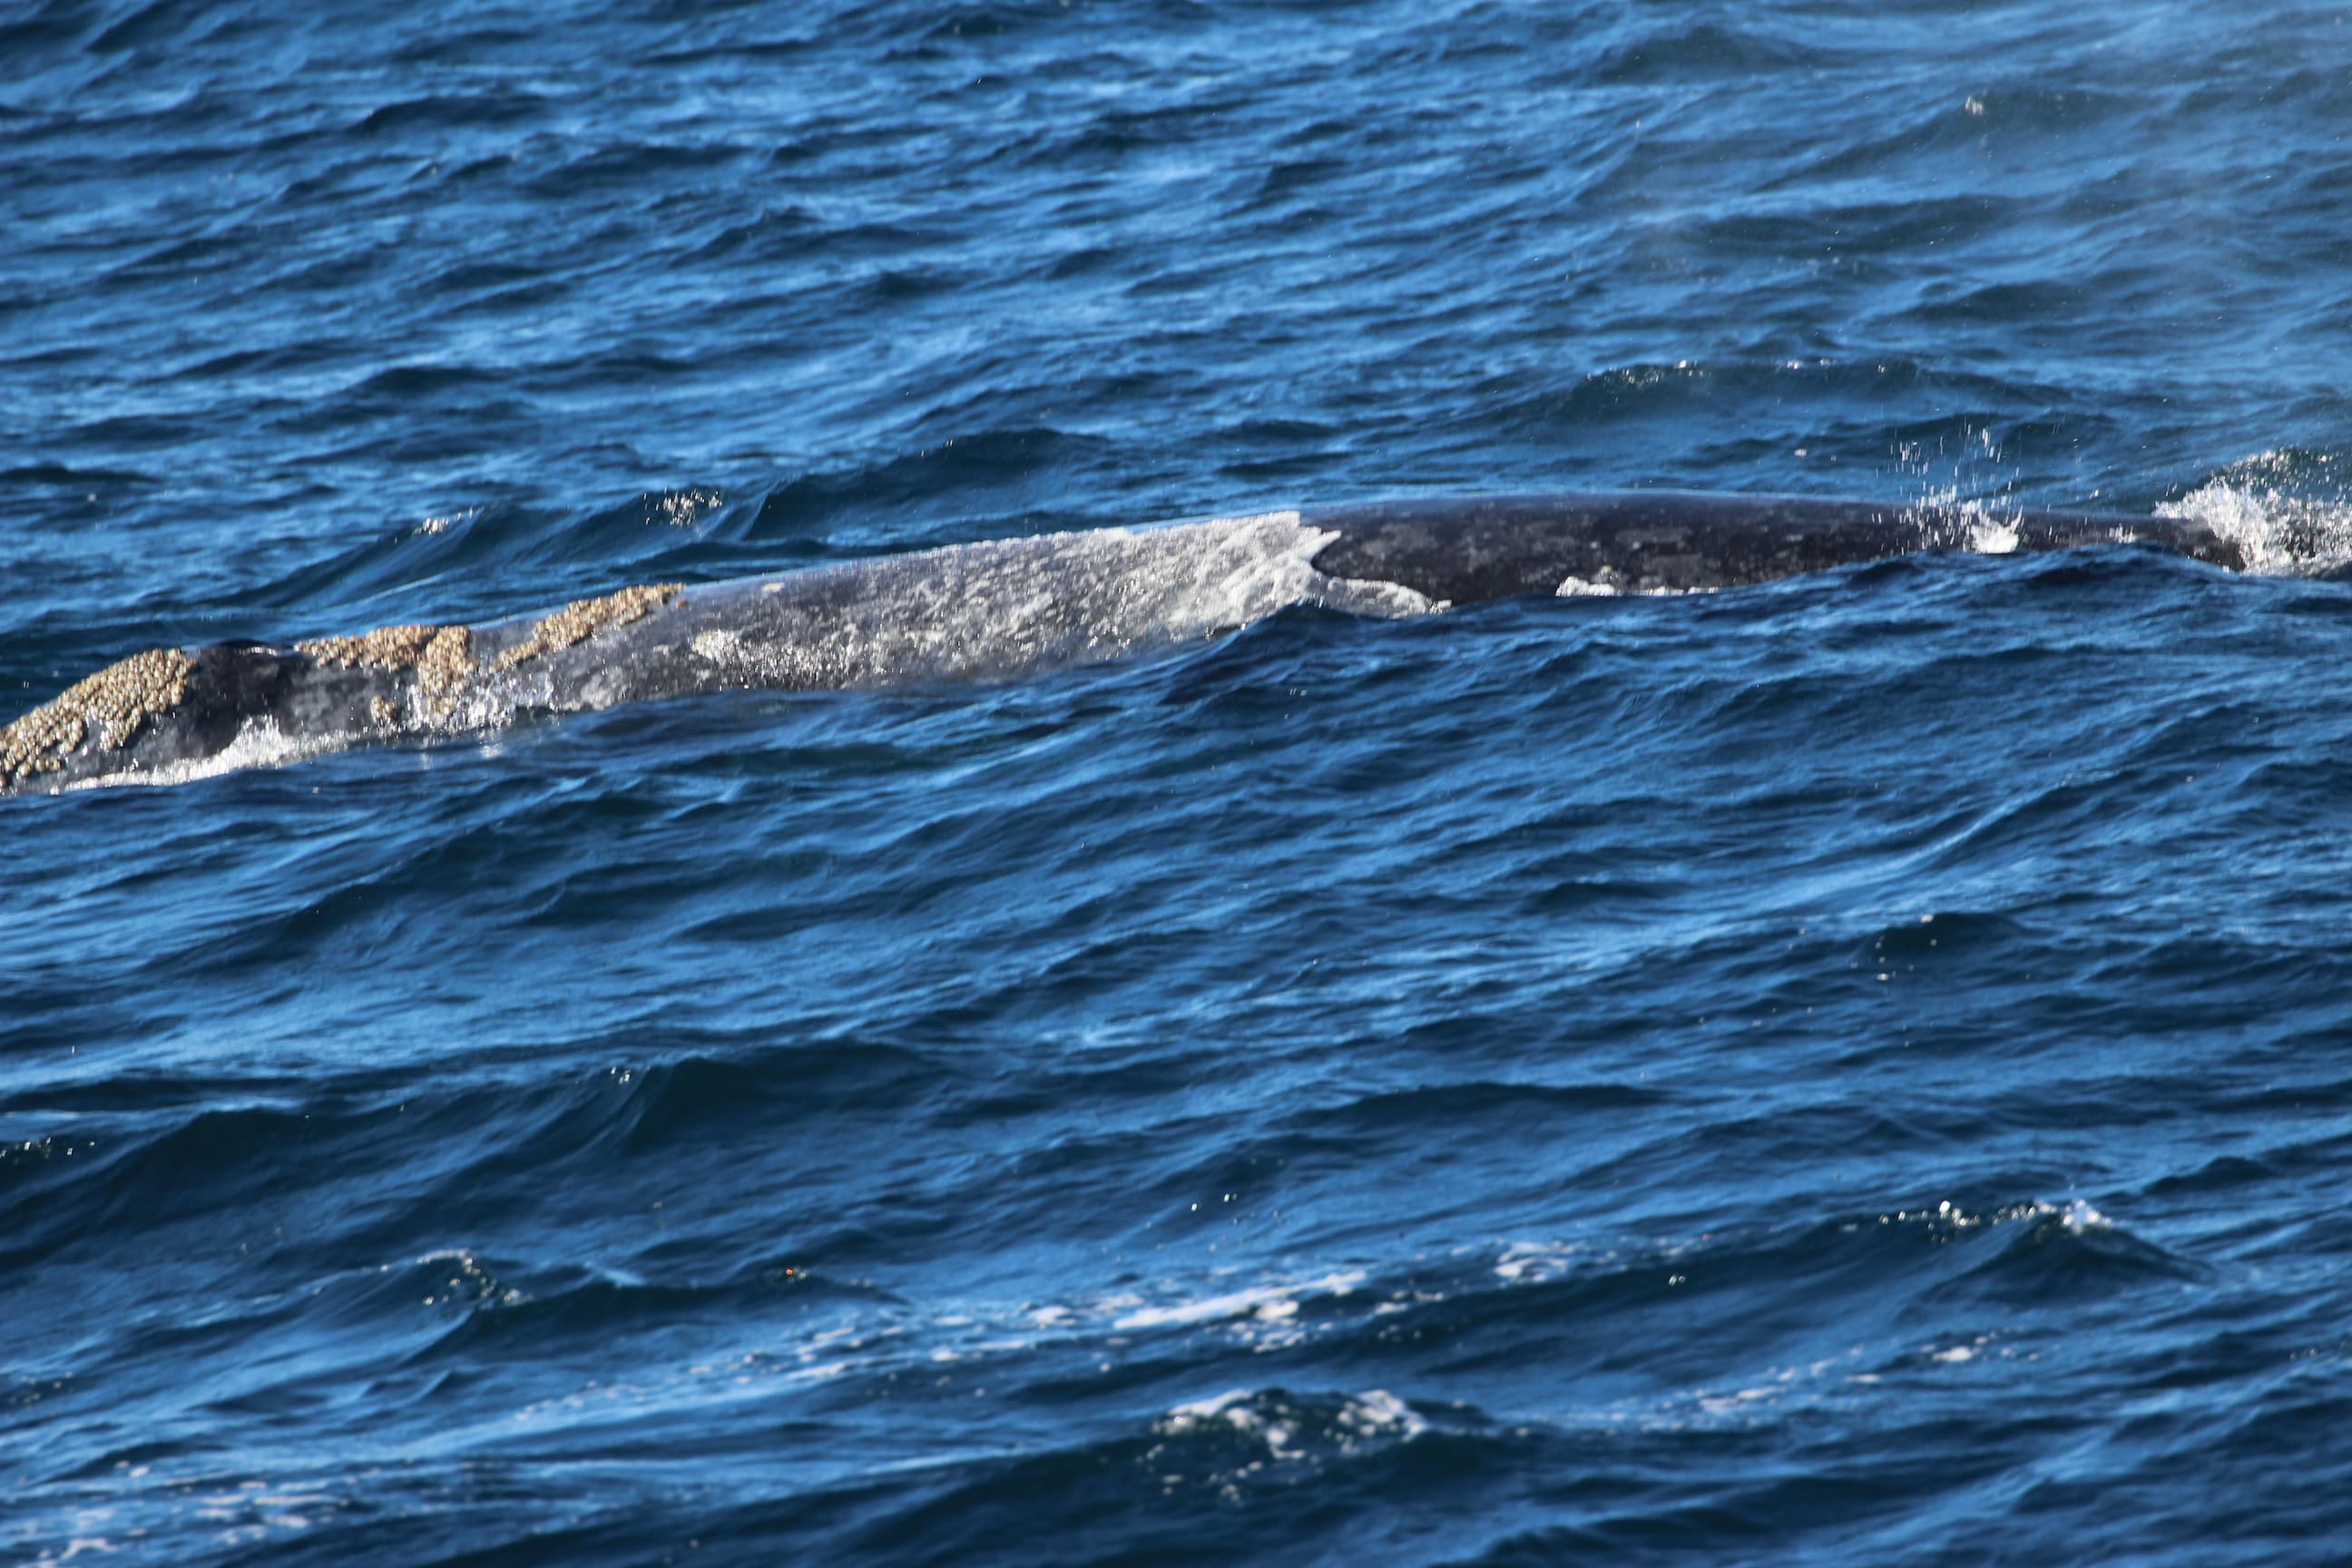 A gray whale in the water